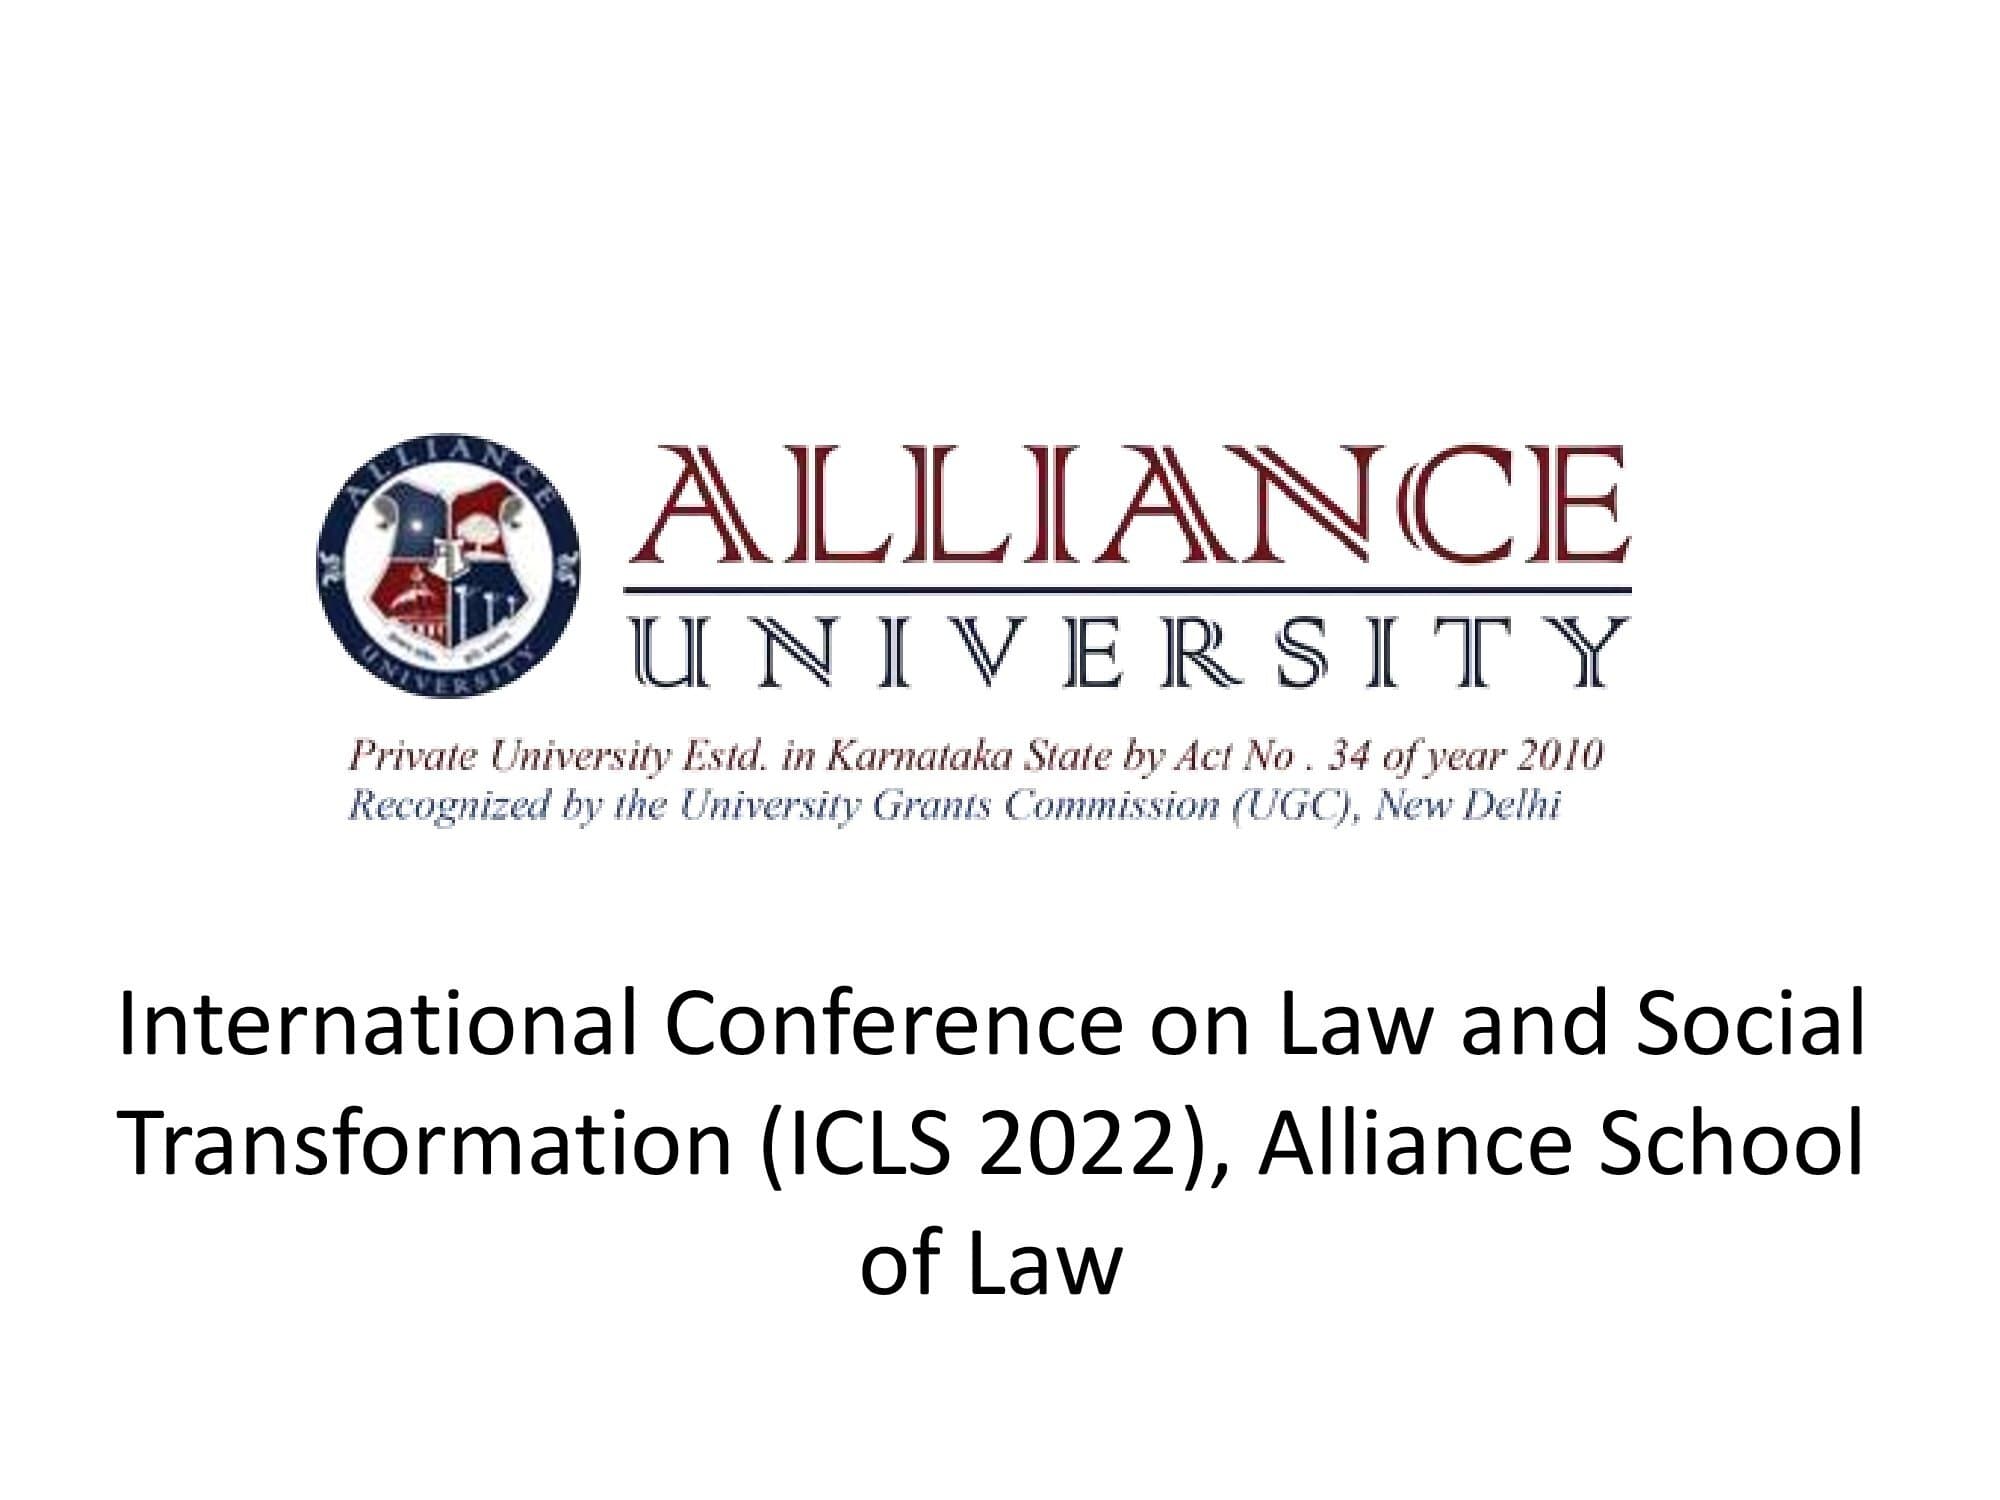 International Conference on Law and Social Transformation (ICLS 2022), Alliance School of Law